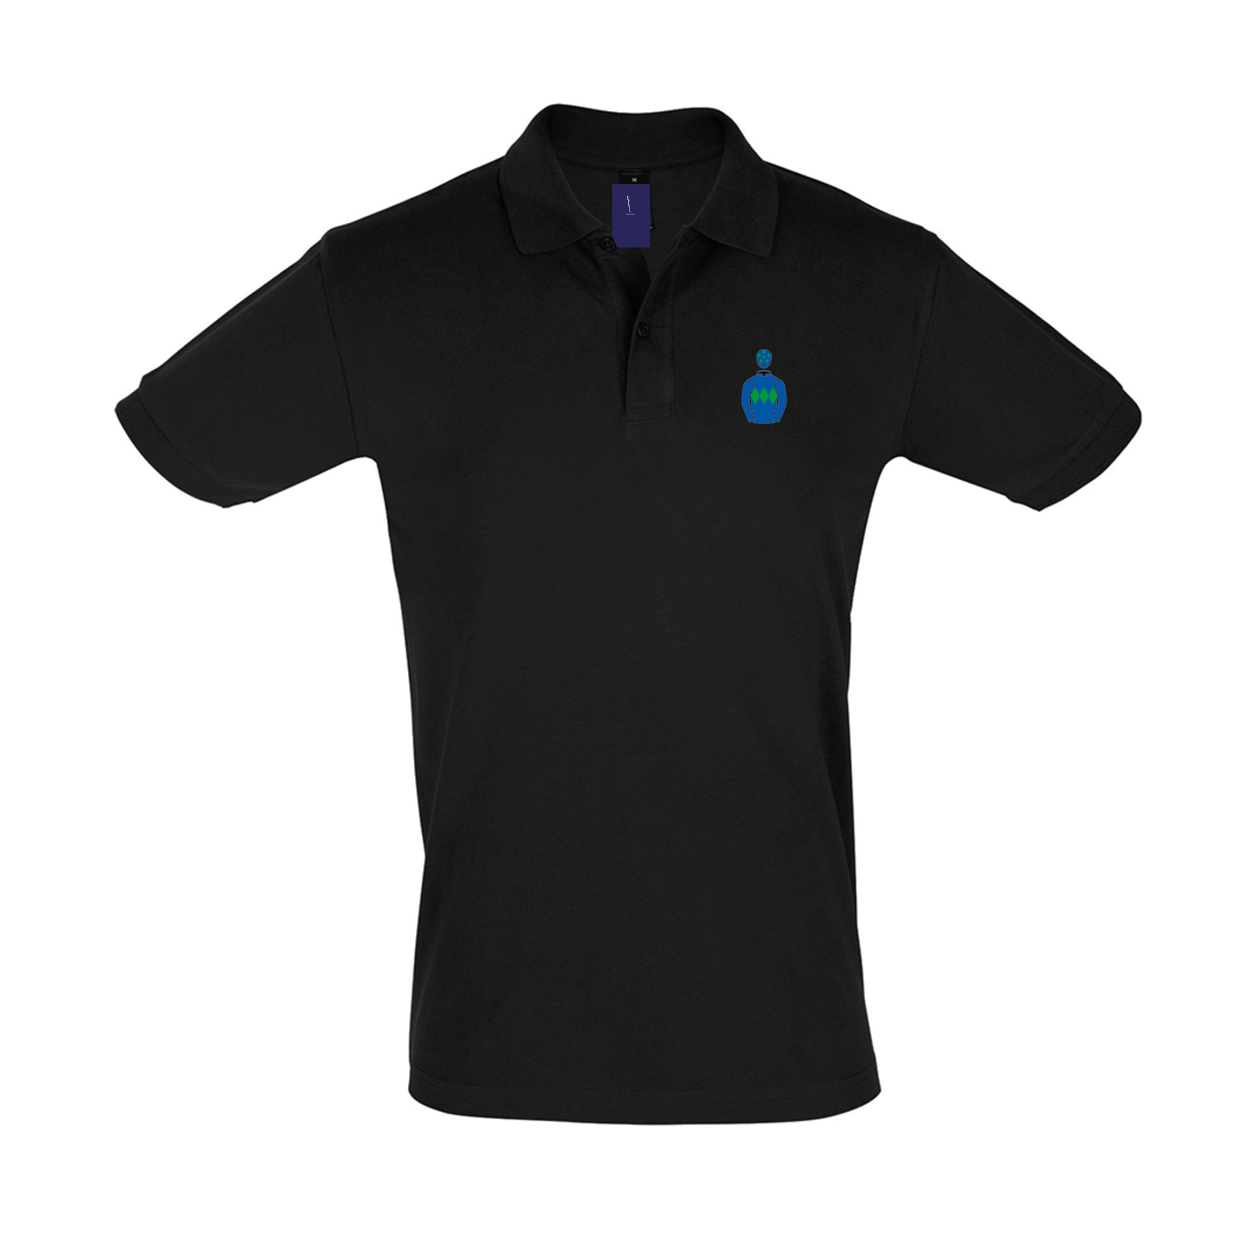 Ladies George Creighton Embroidered Polo Shirt - Clothing - Hacked Up